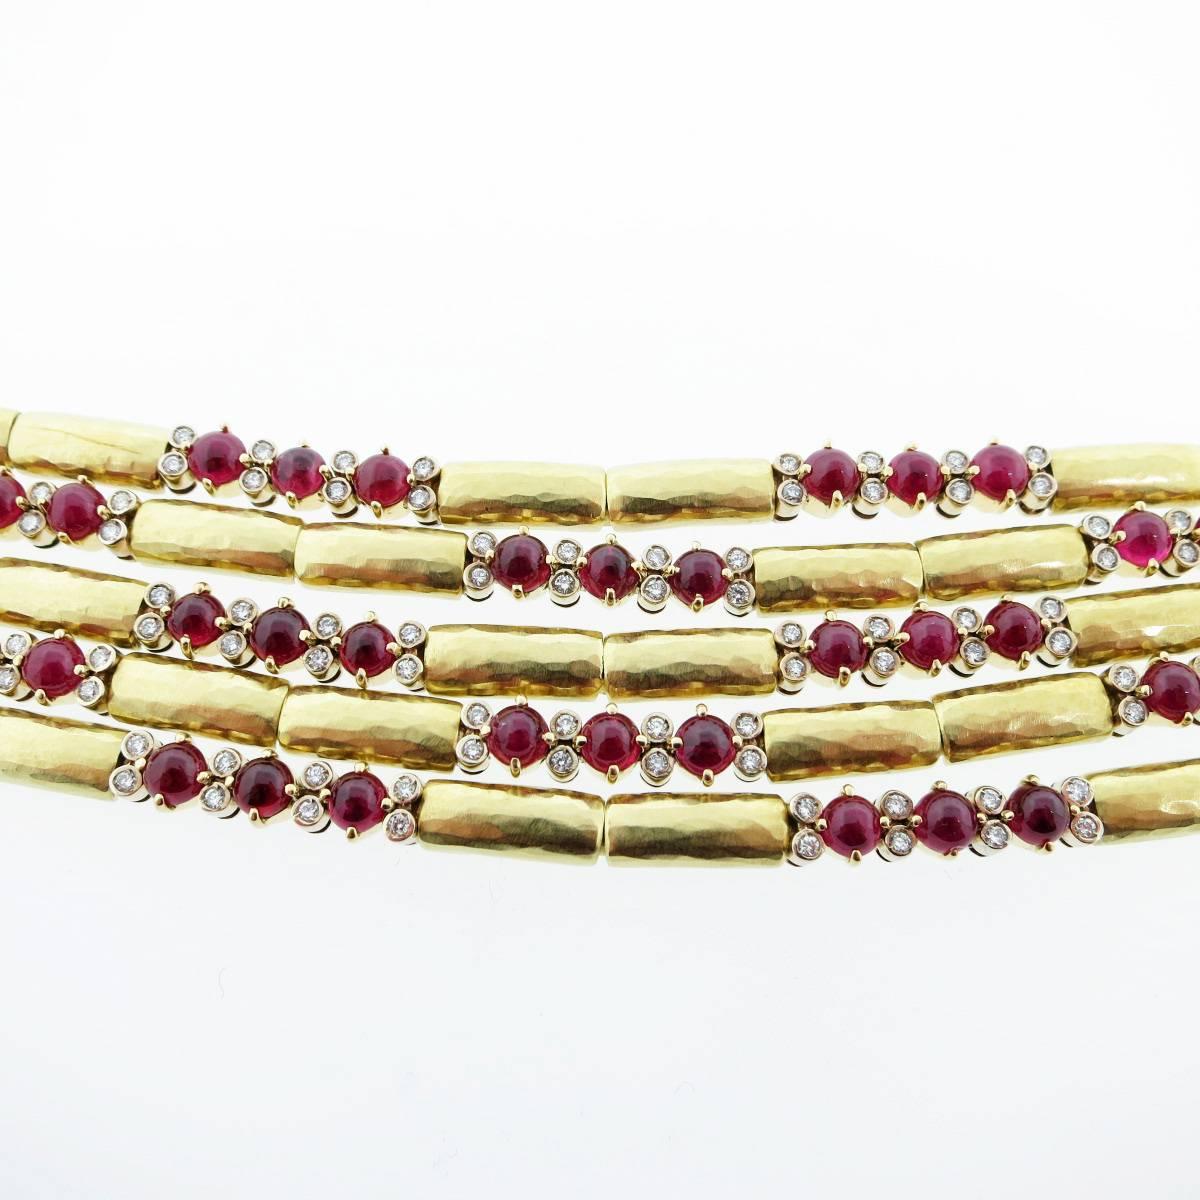 18kt. yellow gold five fluid strand bracelet. Each strand is strung with matte finish barrel shape links that flow independently on the wrist spaced with 36 prong set round cabochon fine natural rubies totaling approx 18cts. and 96 bezel set round